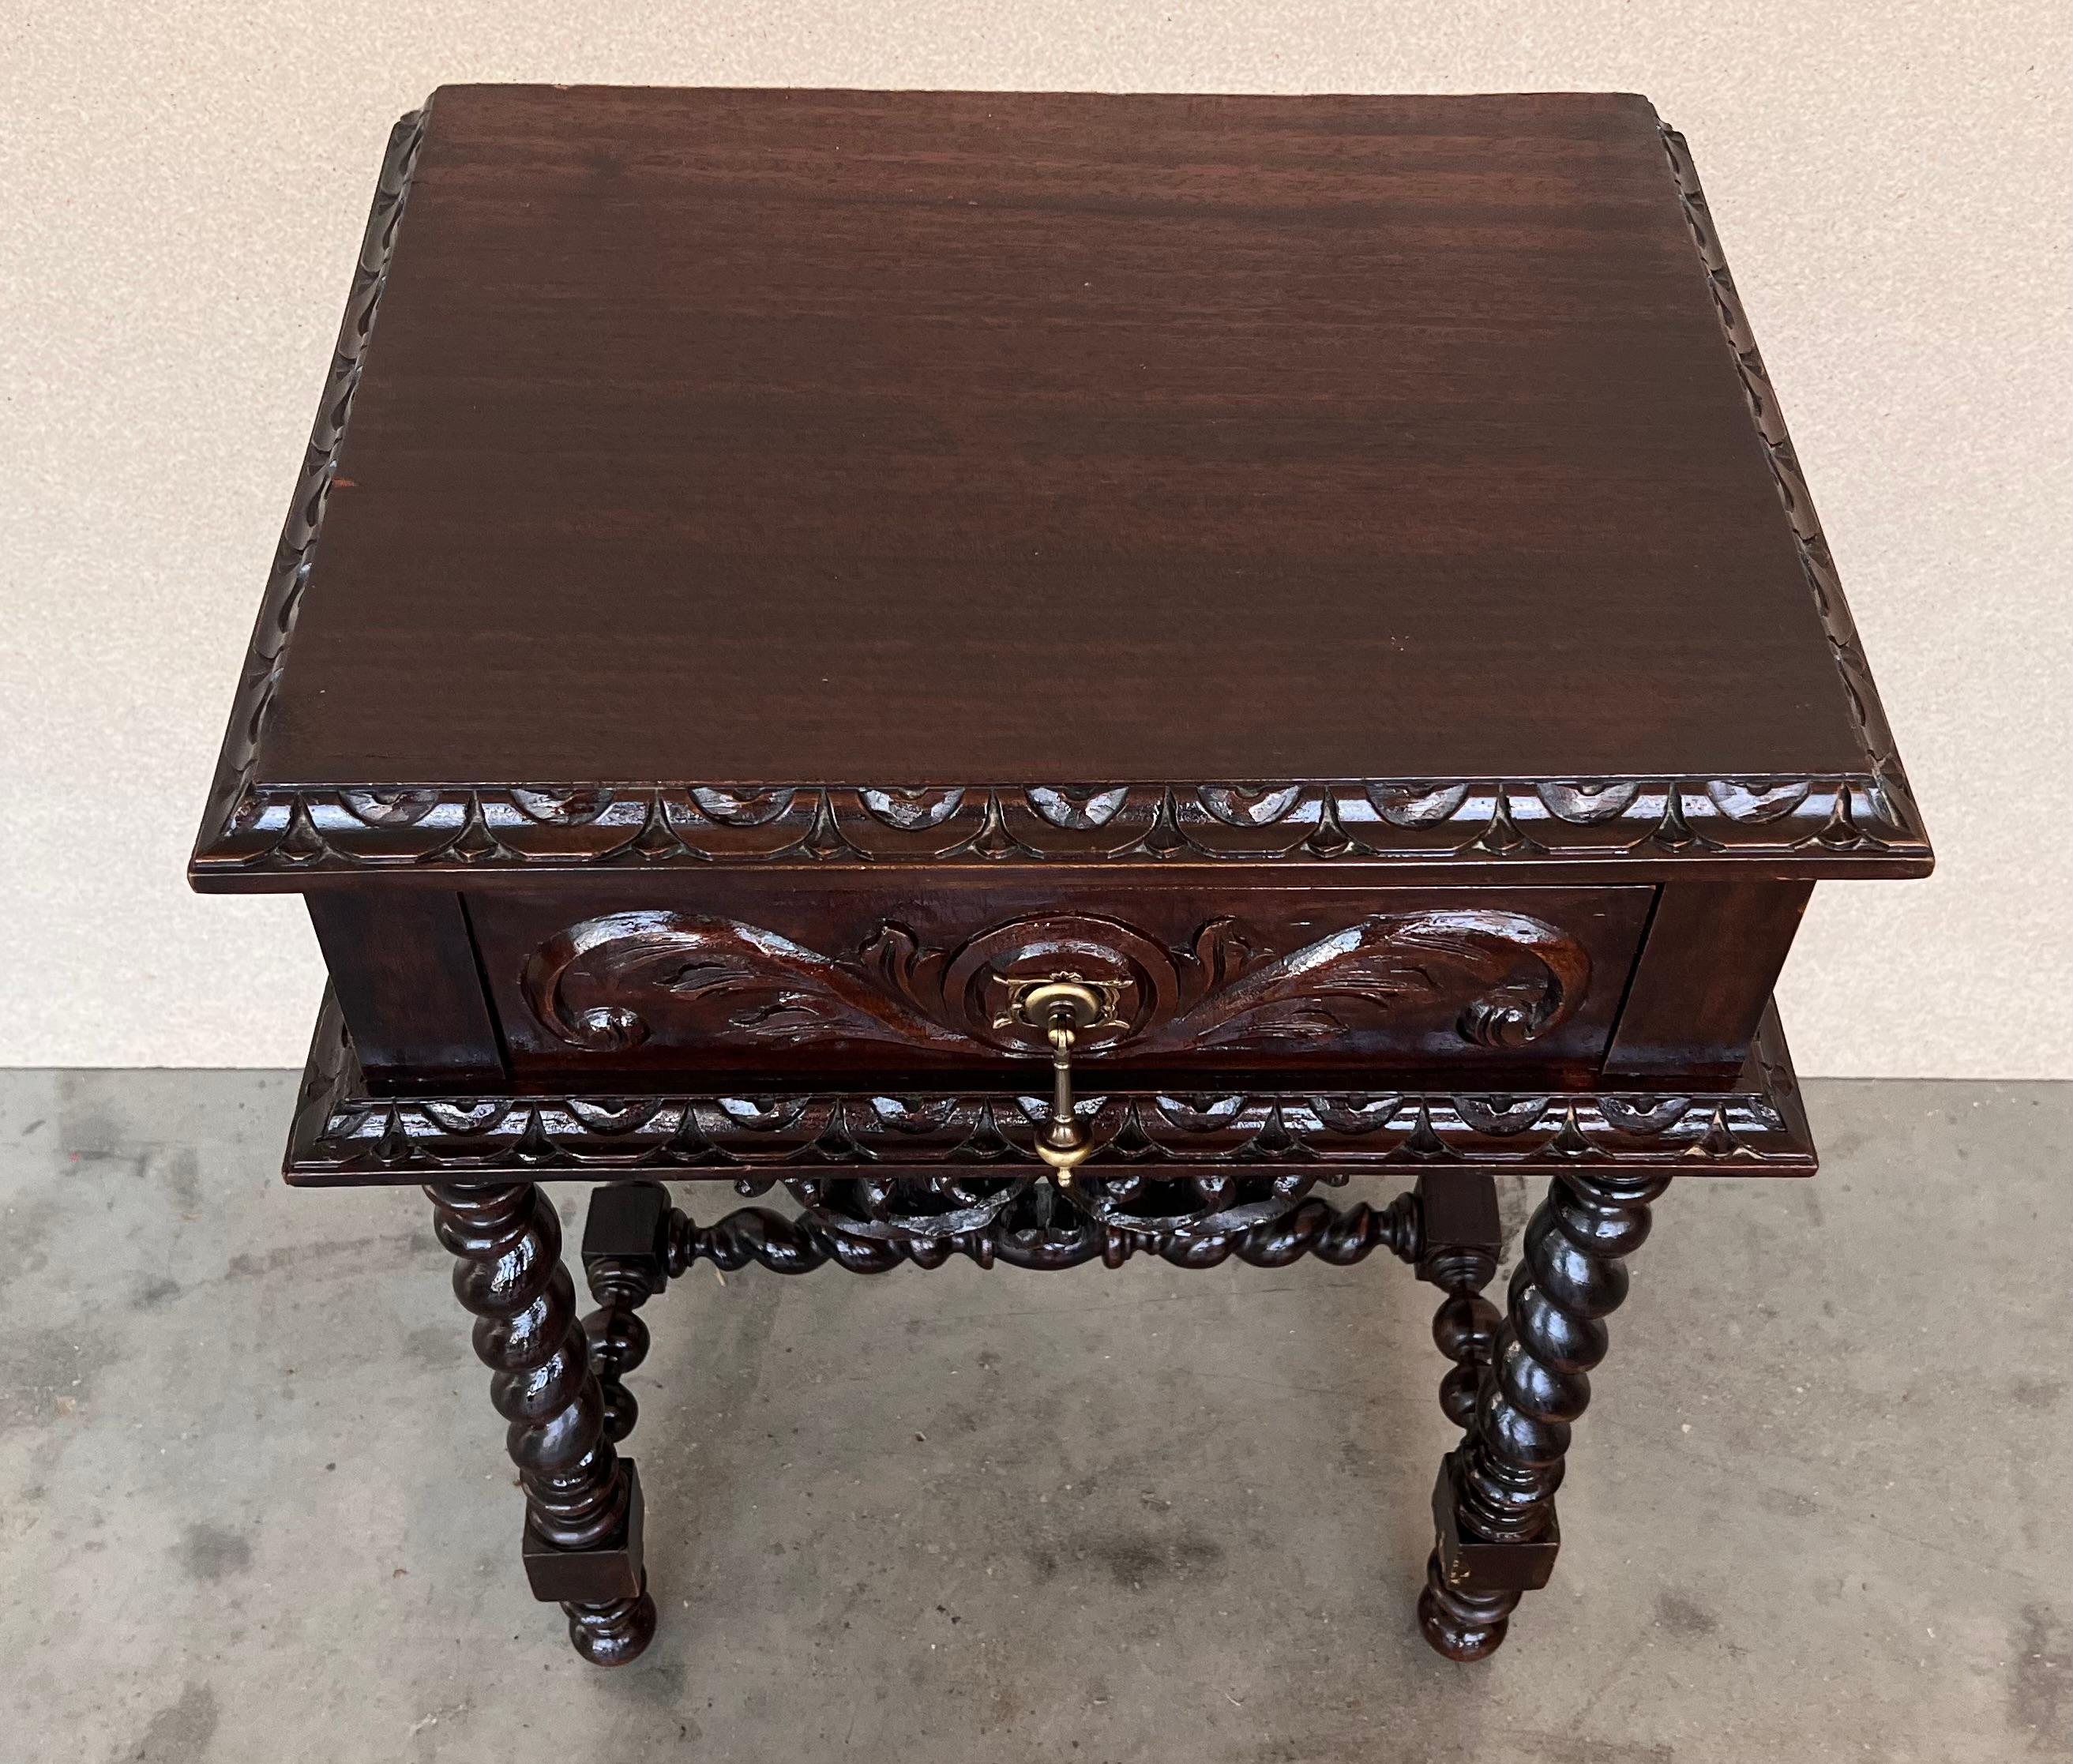 Pair of Carved Spanish Nightstands with Solomonic Columns and Drawer in Black In Good Condition For Sale In Miami, FL